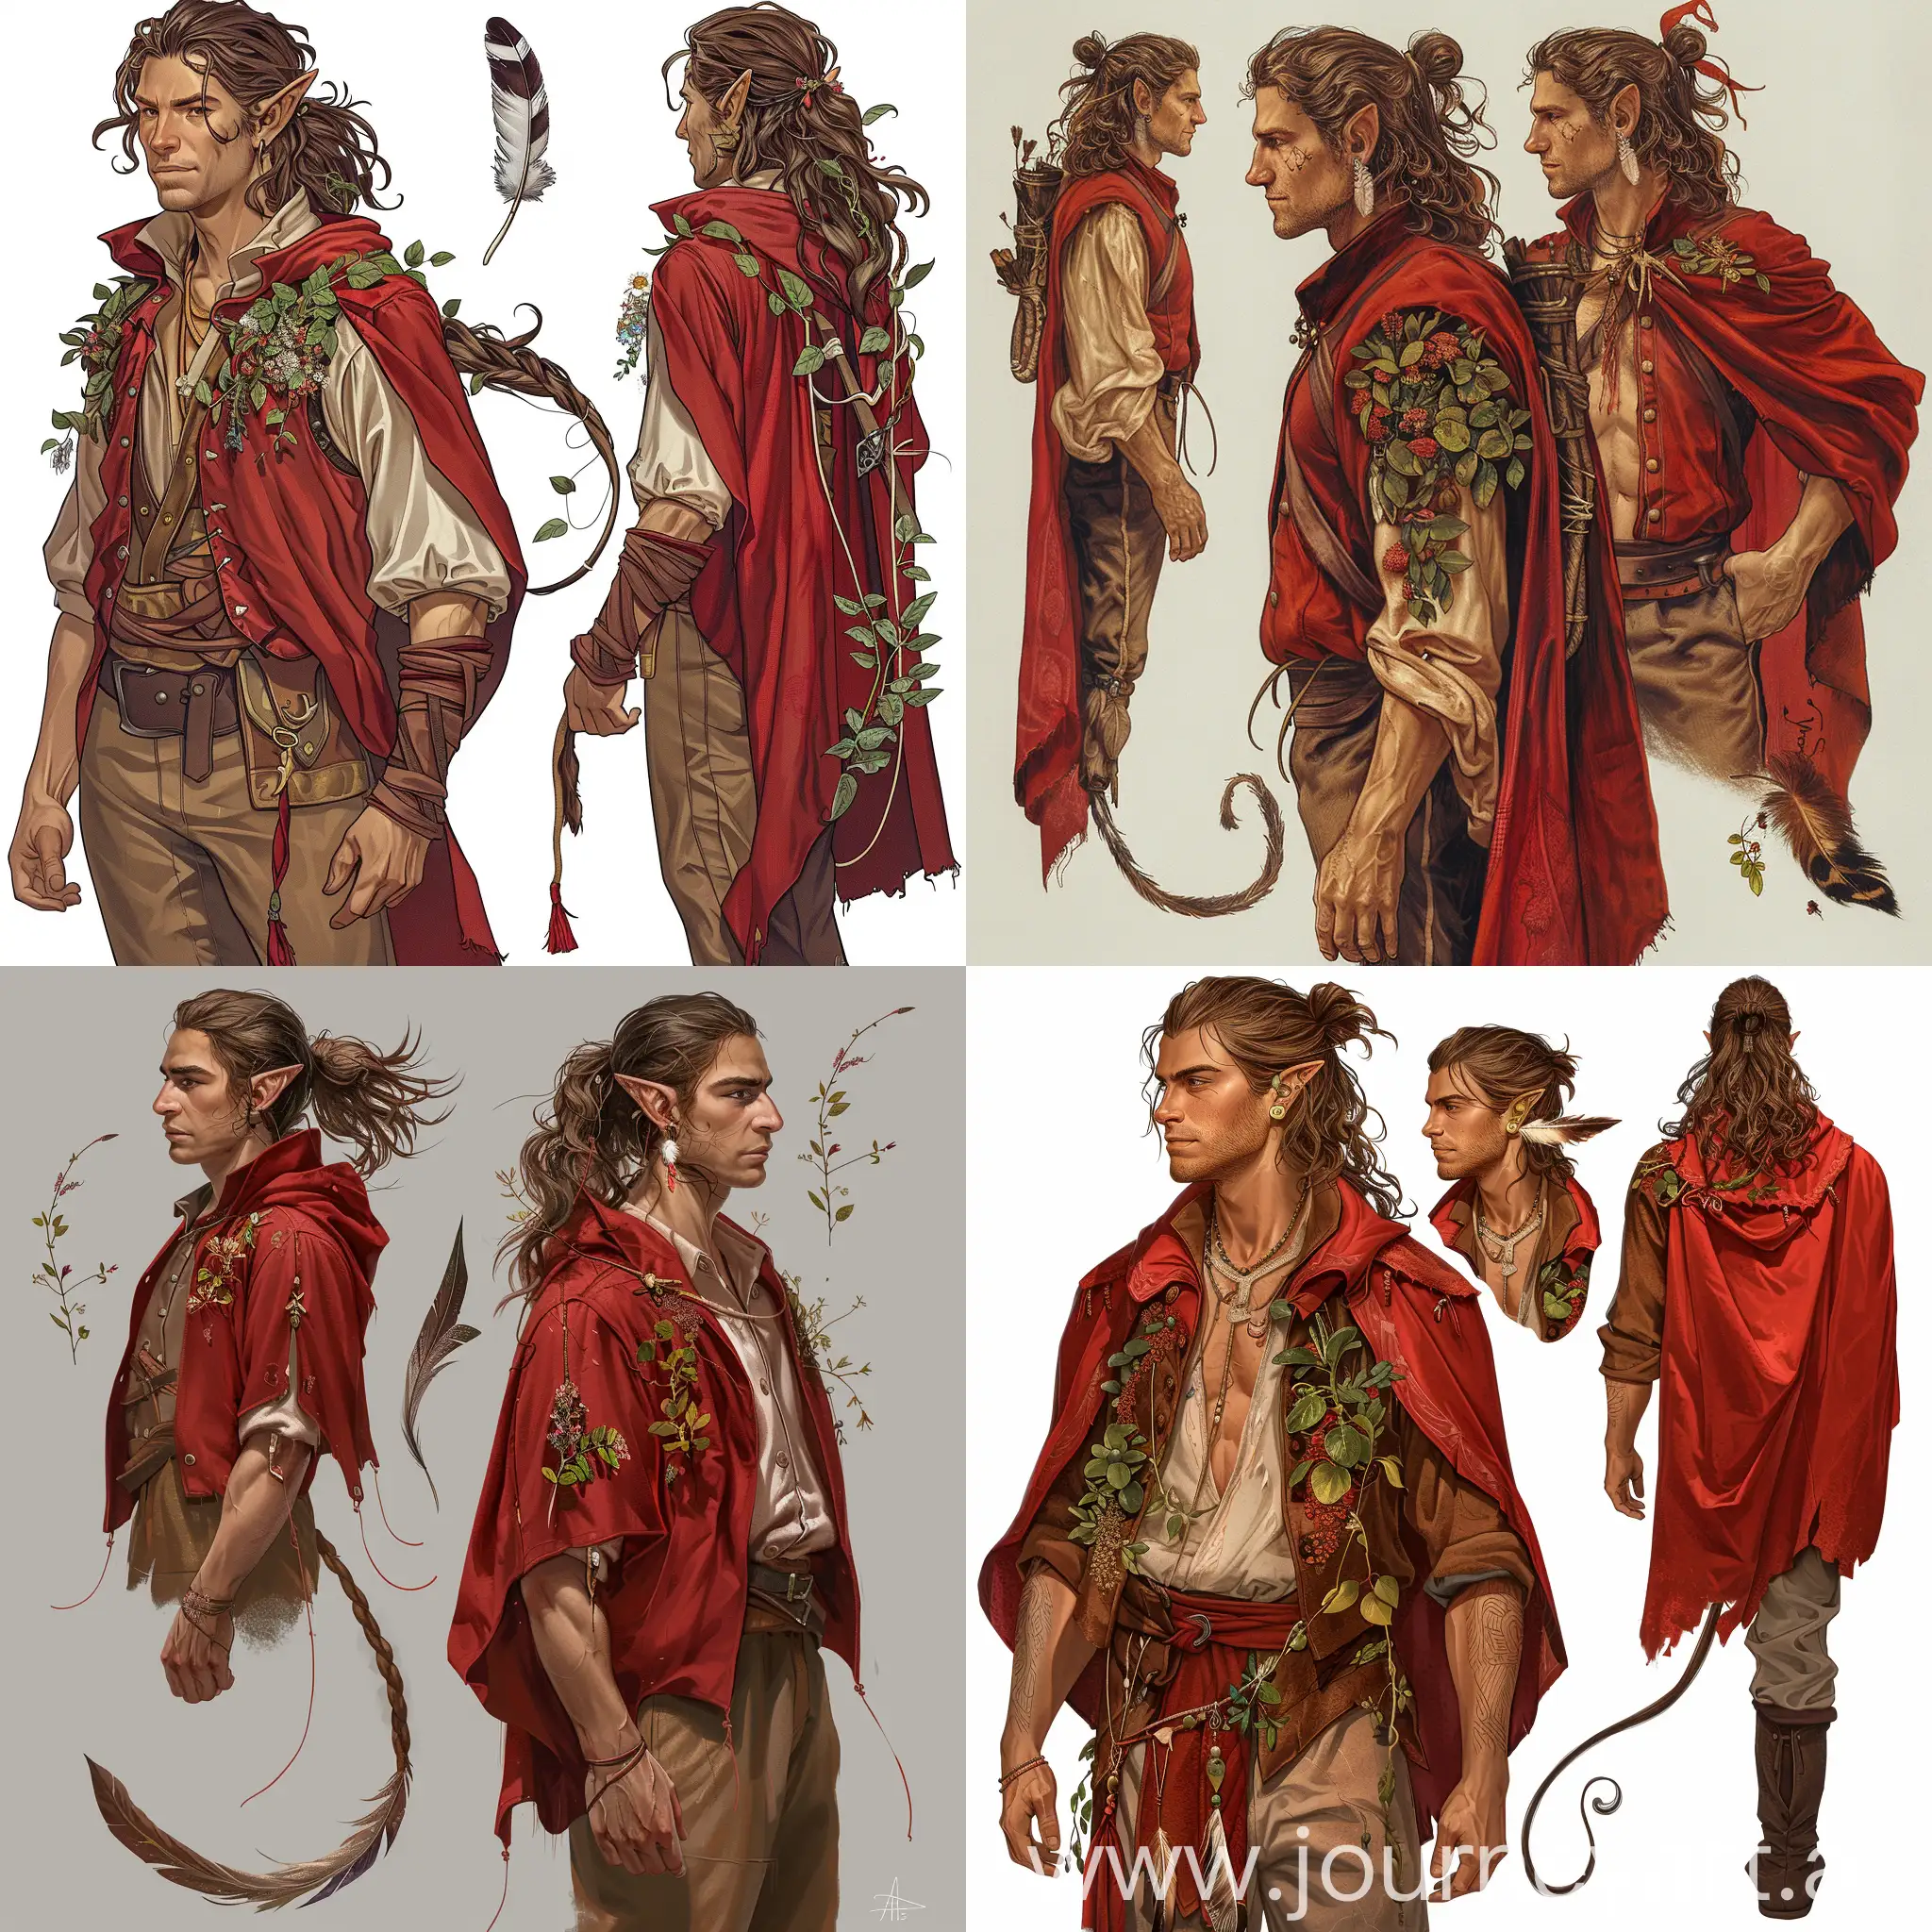 a man with broad shoulders, an adult, wavy brown hair, a ponytail at the bottom, a red cloak, a herbarium on his clothes, an unbuttoned shirt, muscles, a thin tail with a tassel, a feather earring in his ear, trousers, multiple views, full height